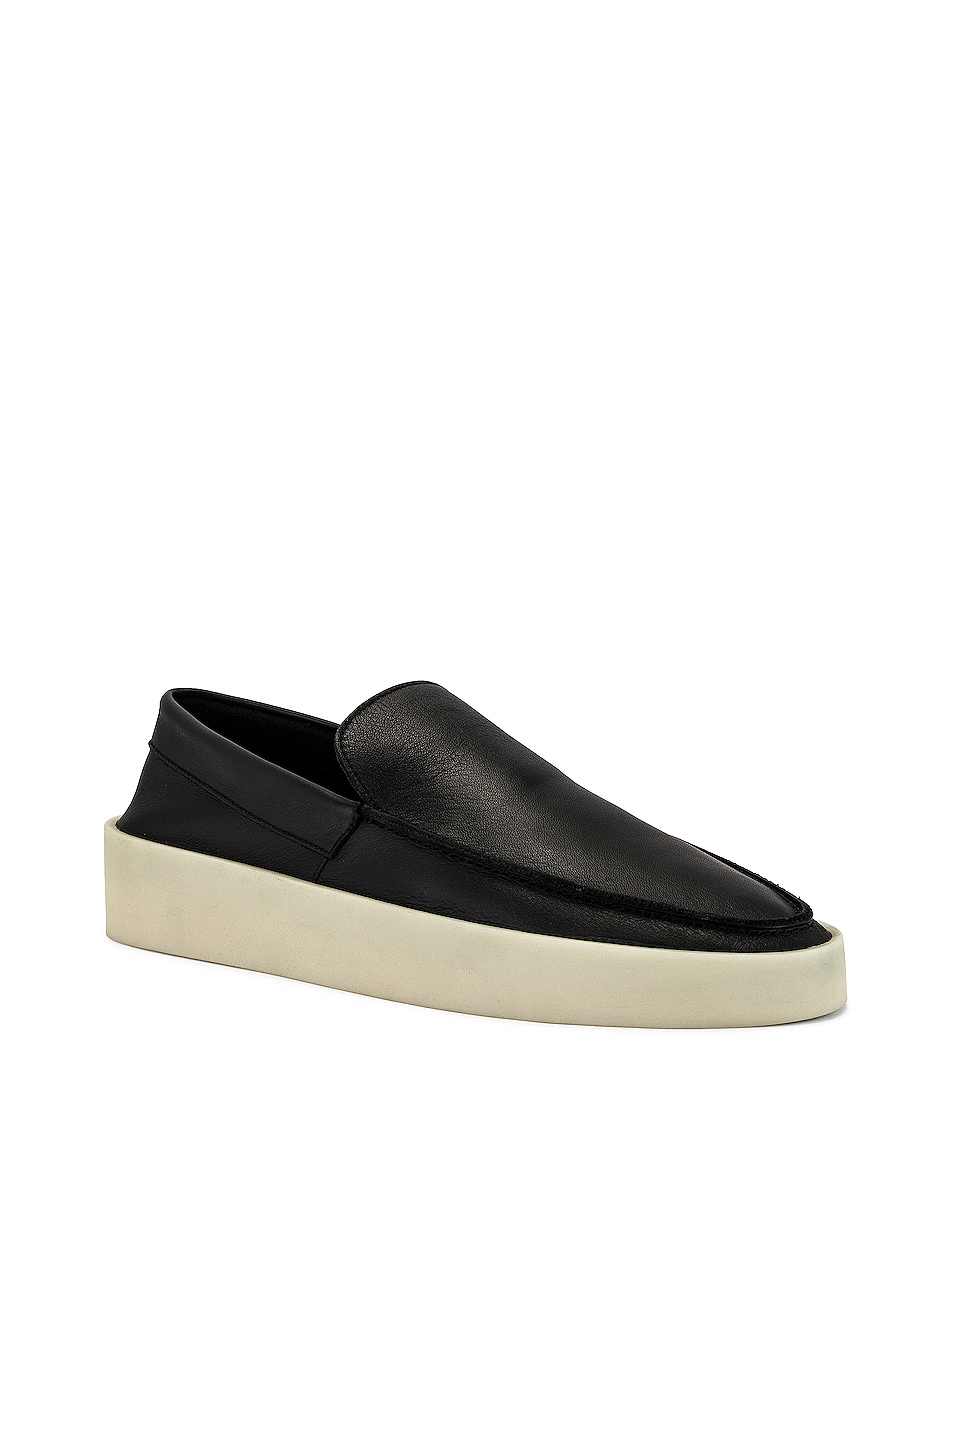 Image 1 of Fear of God The Loafer in Black